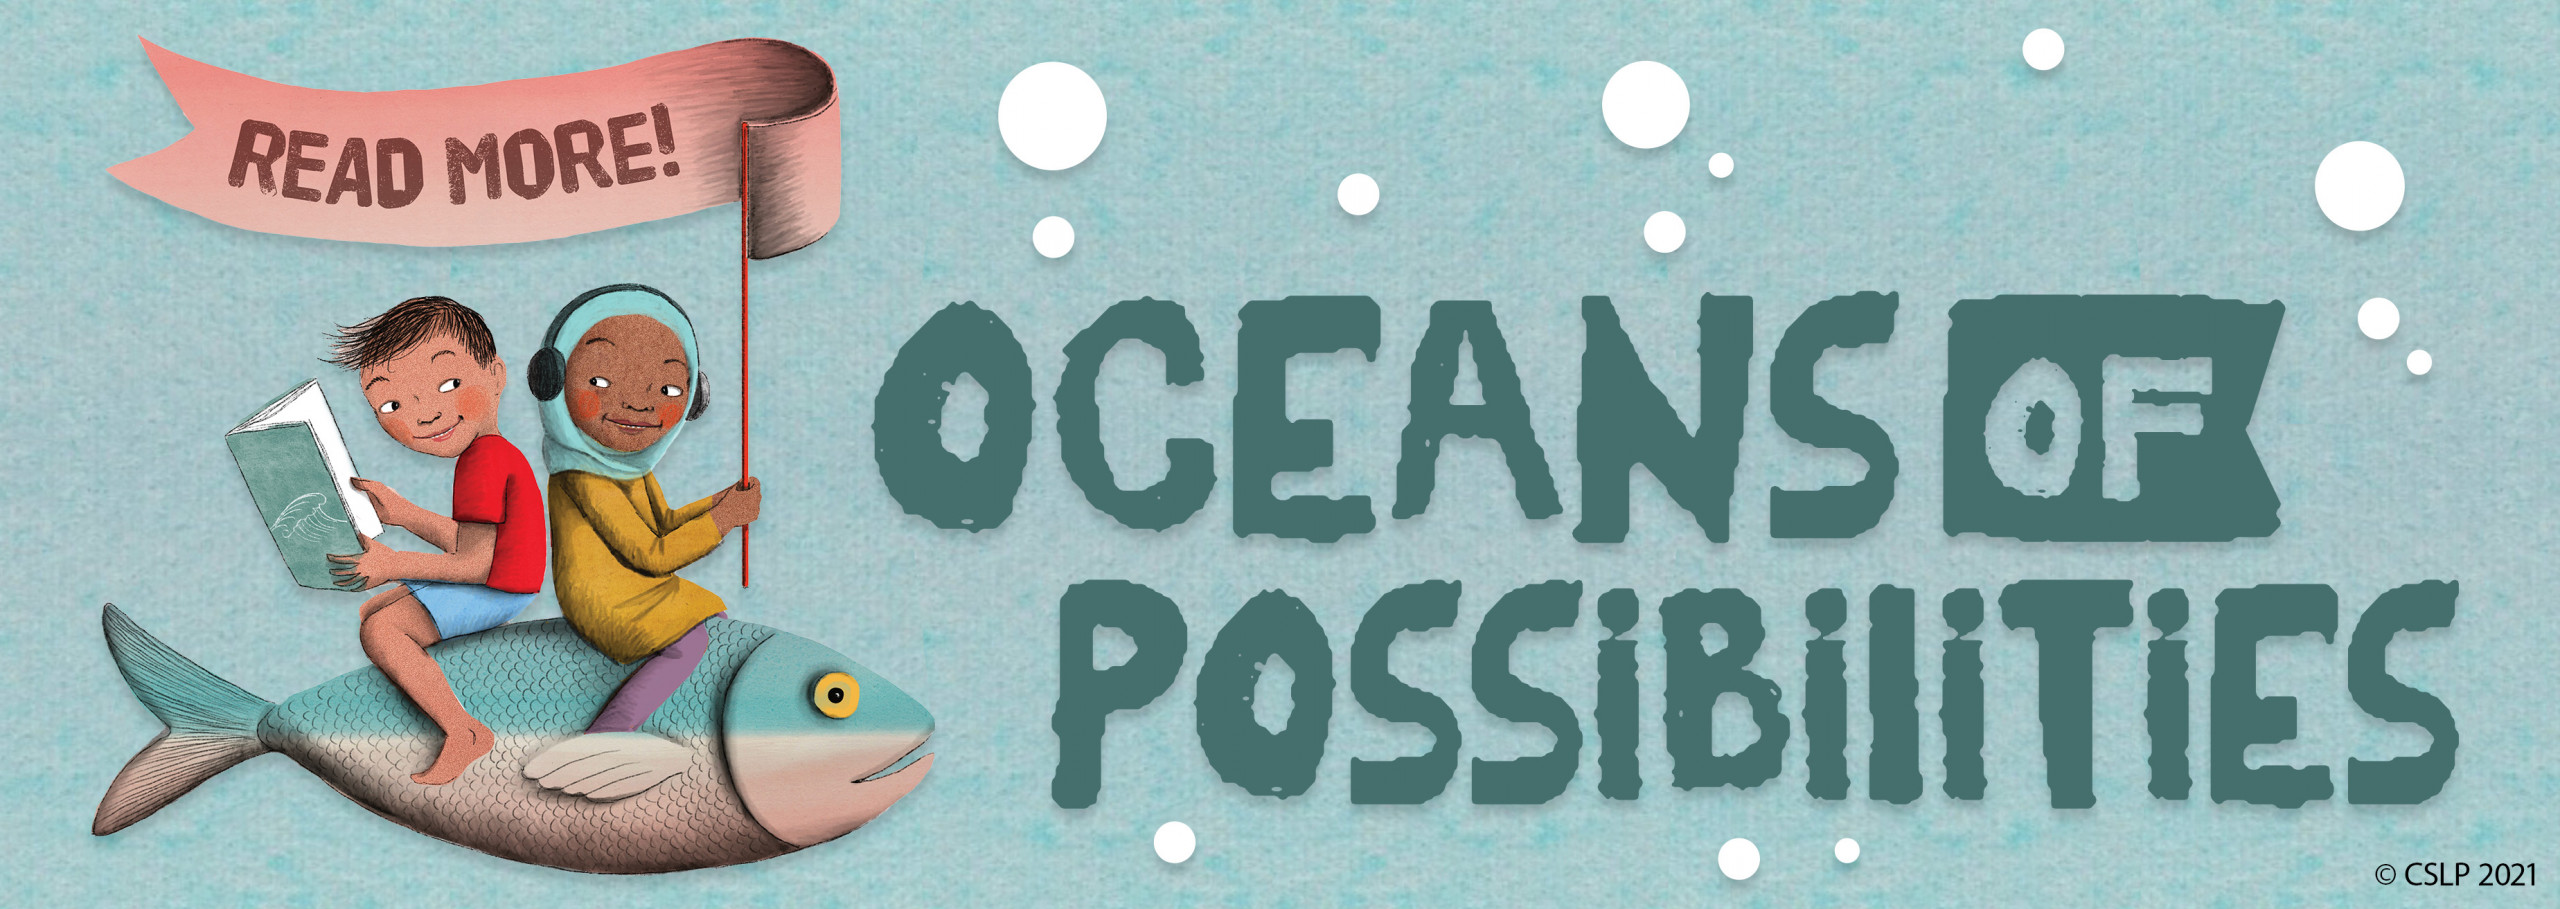 kids reading on fish-text says oceans of possibilities